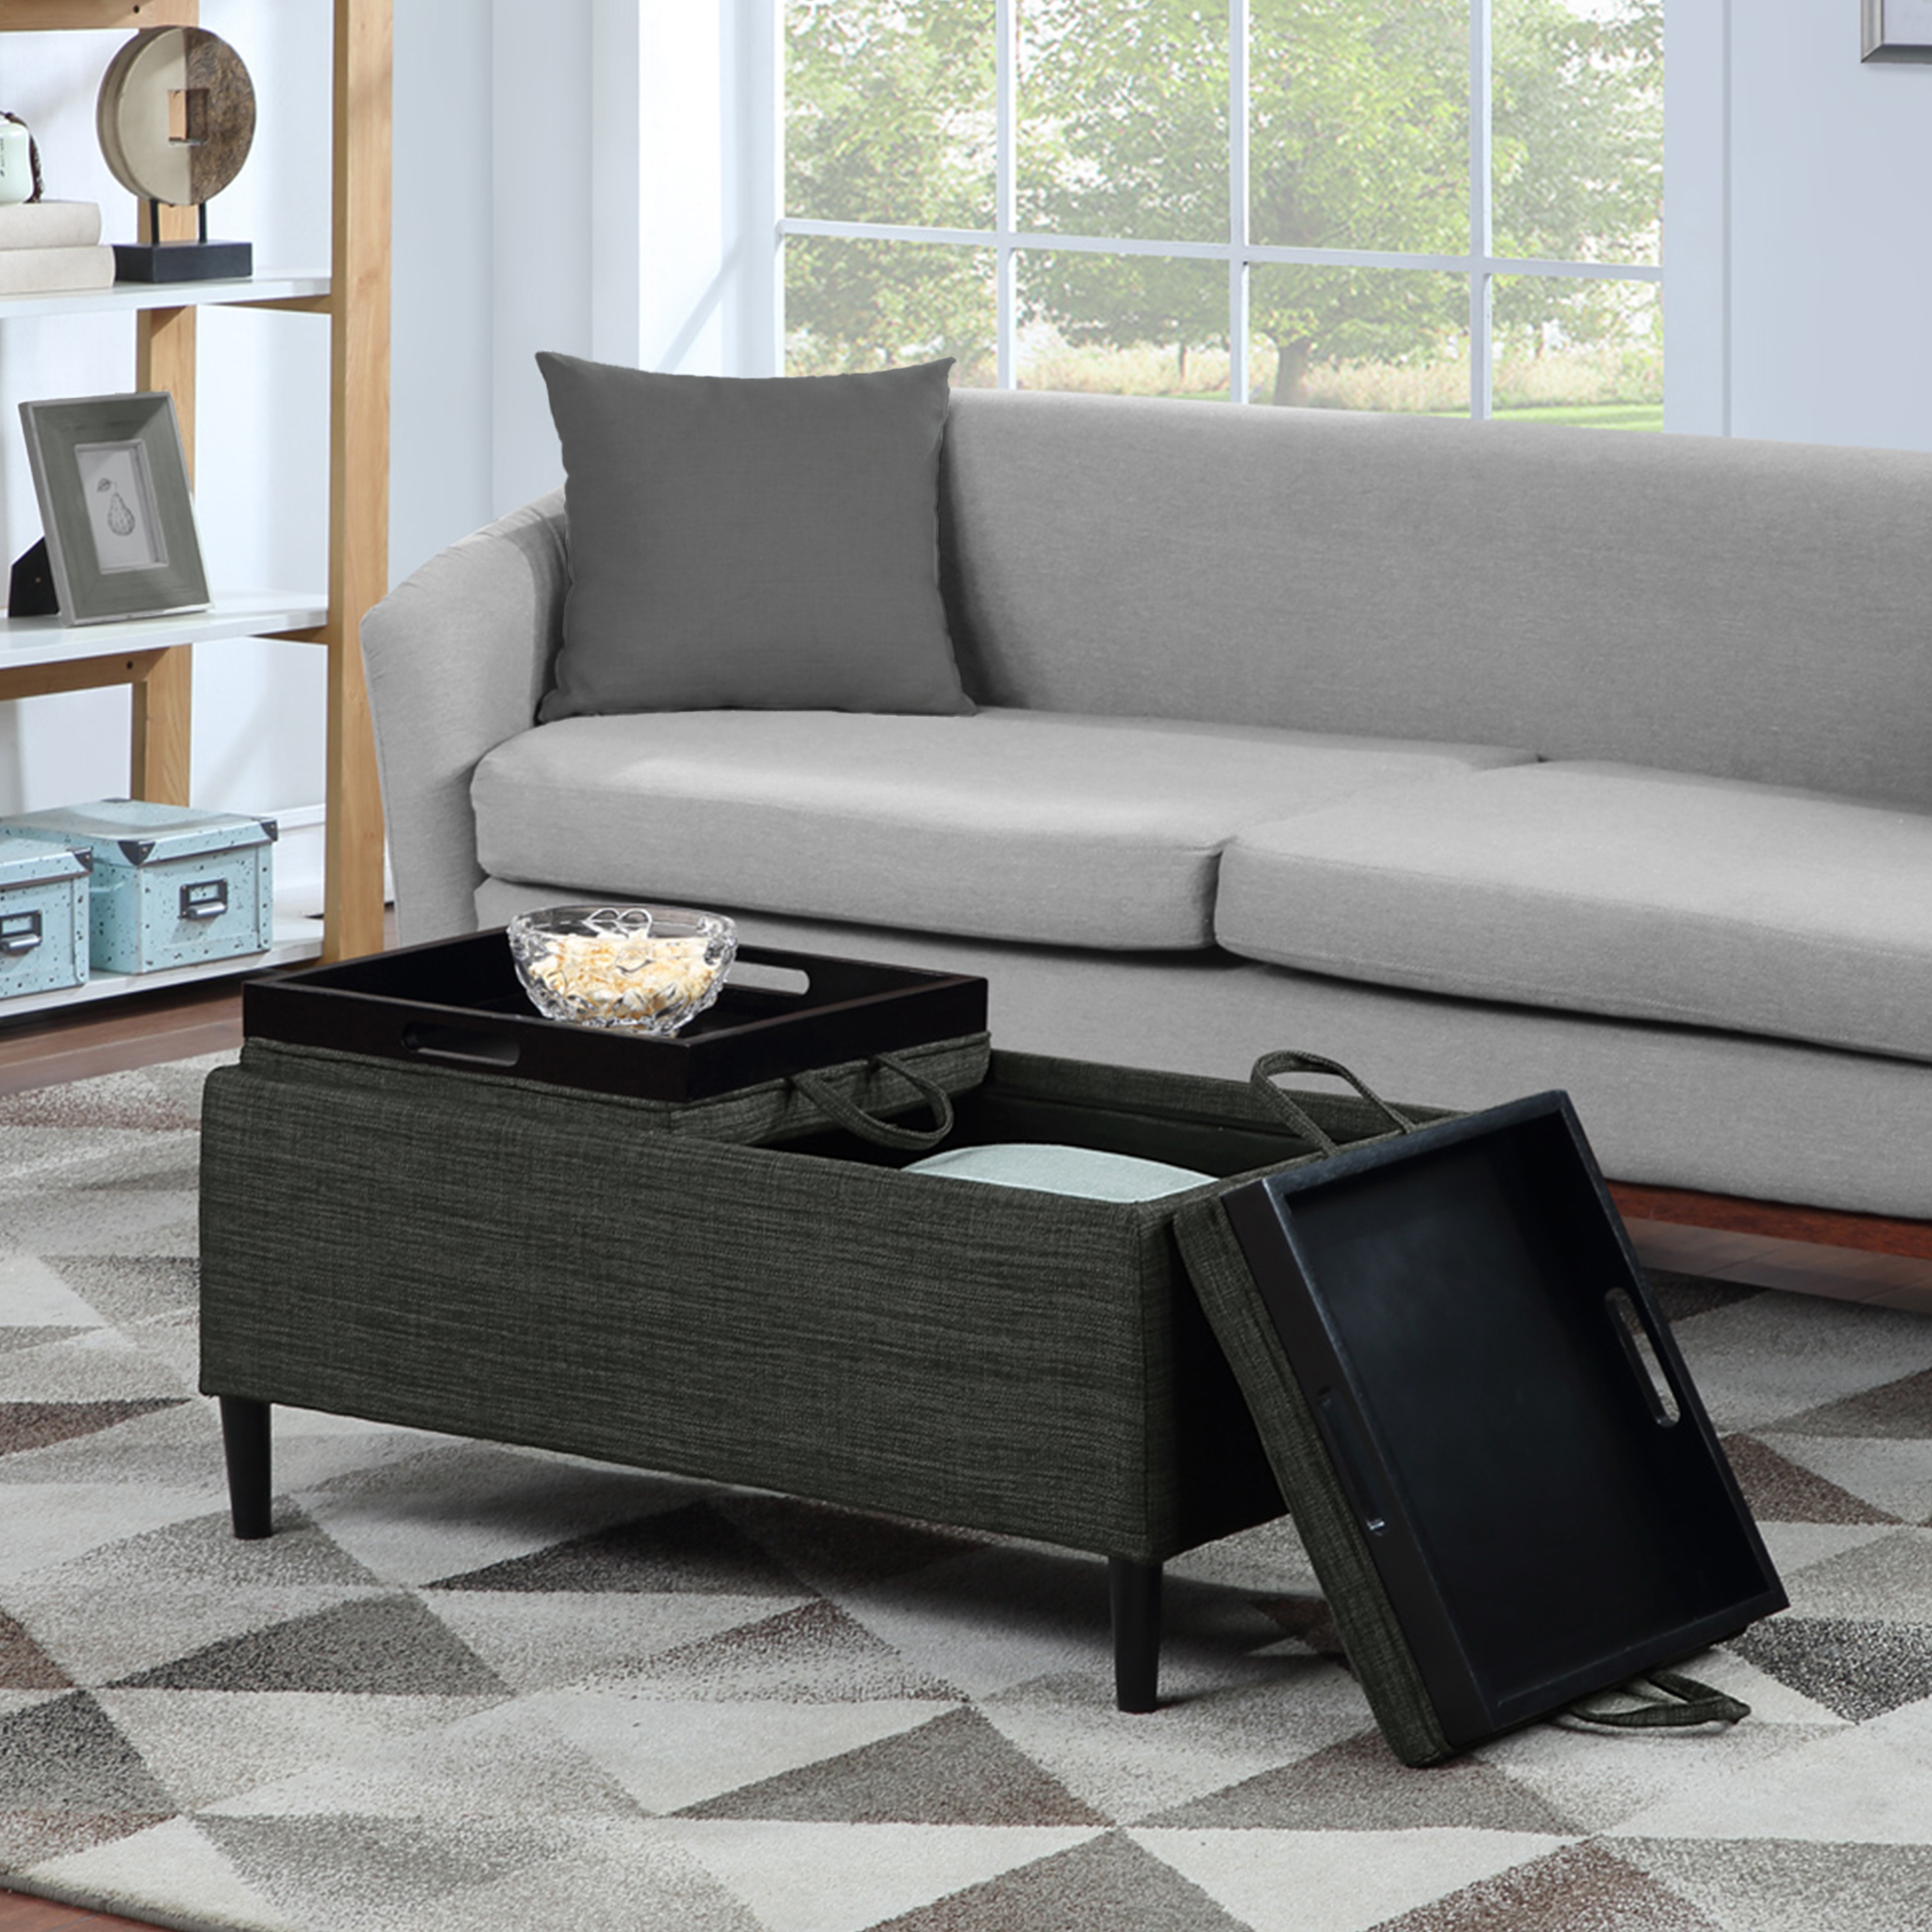 Convenience Concepts Designs4Comfort Magnolia Storage Ottoman with Reversible Trays, Dark Charcoal Gray Fabric - image 1 of 7